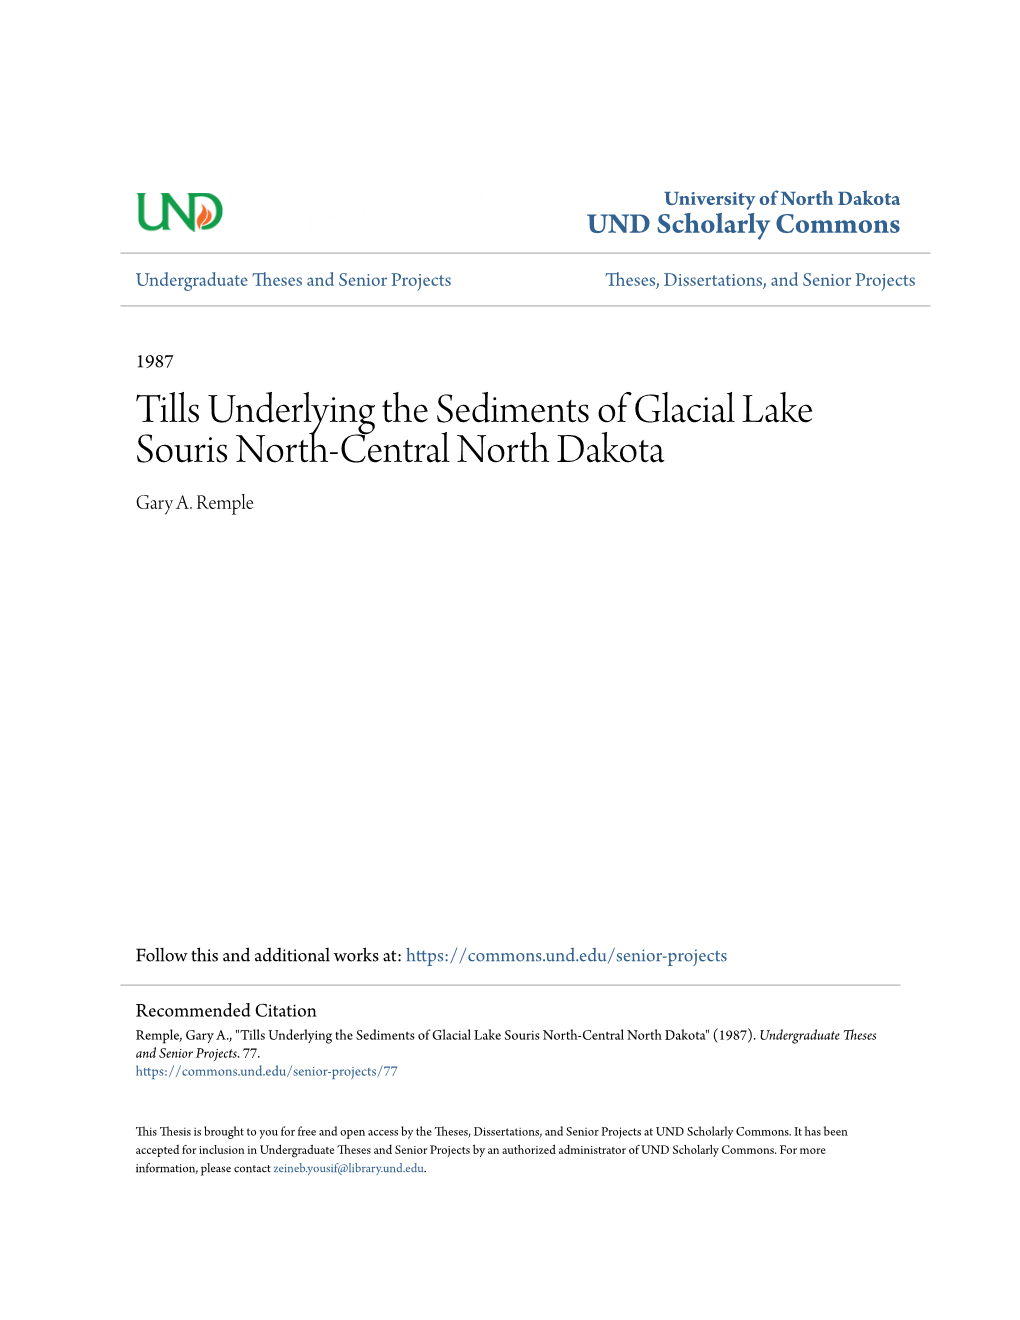 Tills Underlying the Sediments of Glacial Lake Souris North-Central North Dakota Gary A